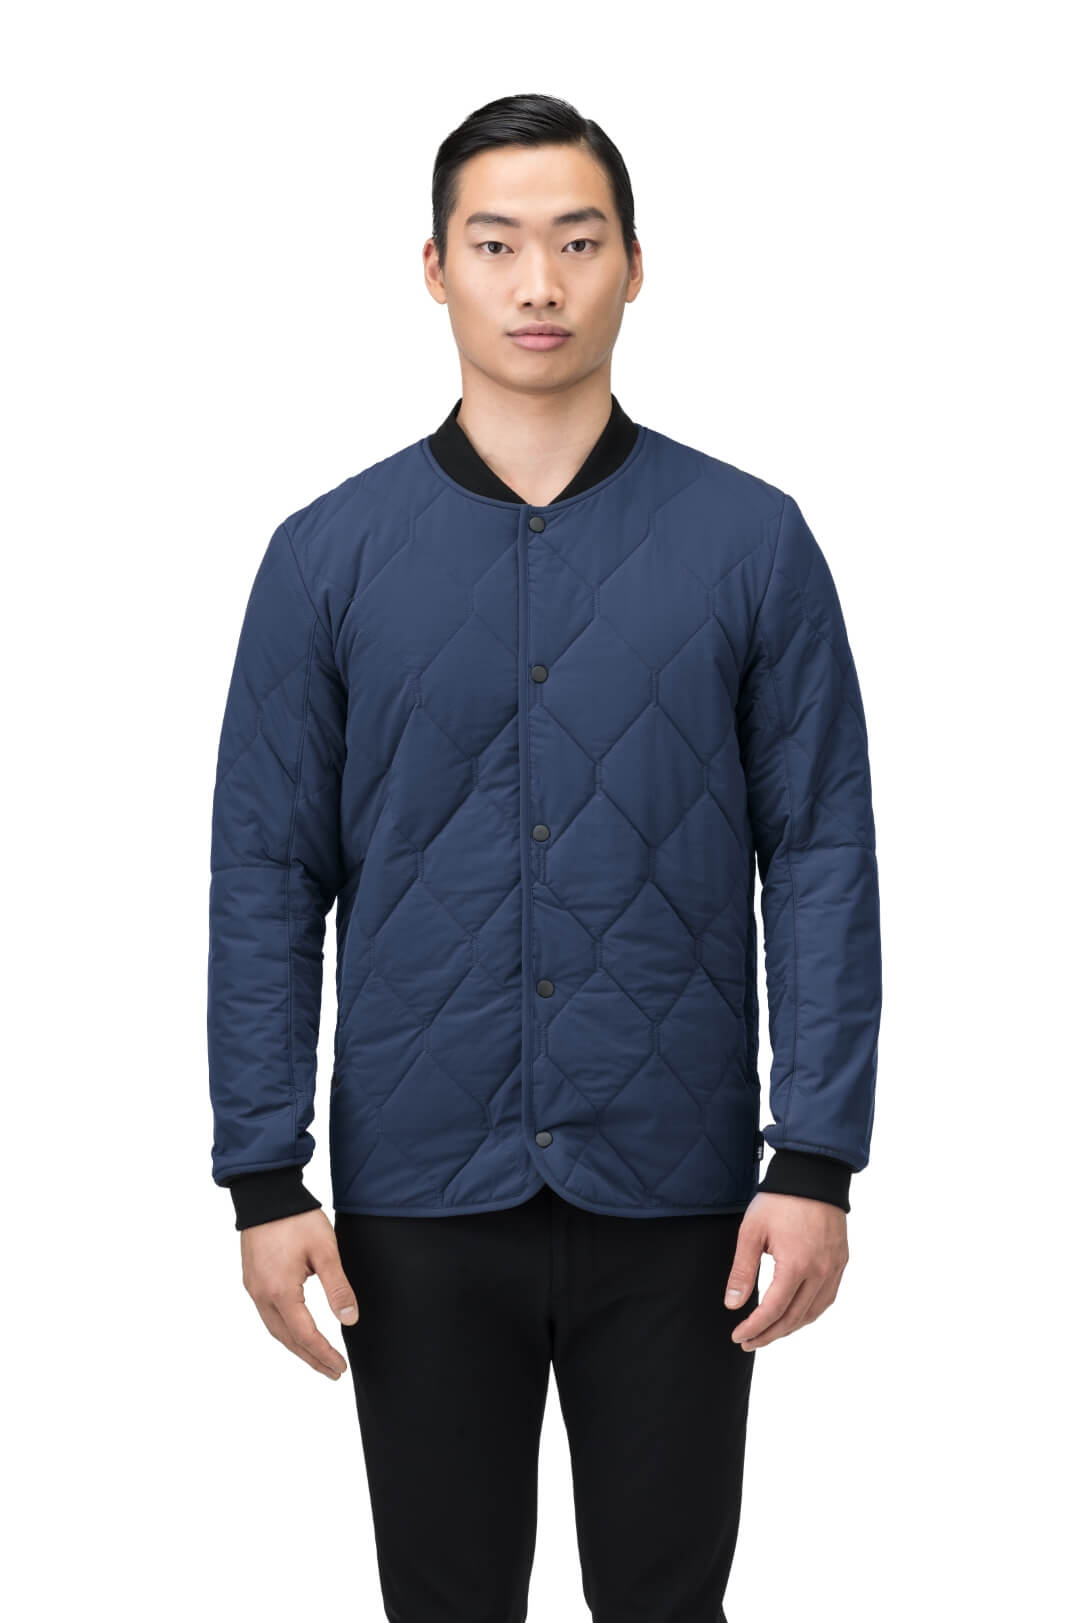 Speck Men's Tailored Mid Layer Jacket in hip length, Primaloft Gold Insulation Active+, diamond quilted body, rib knit collar and cuffs, snap buton front closure, and hidden side-entry zipper pockets at waist, in Blueprint